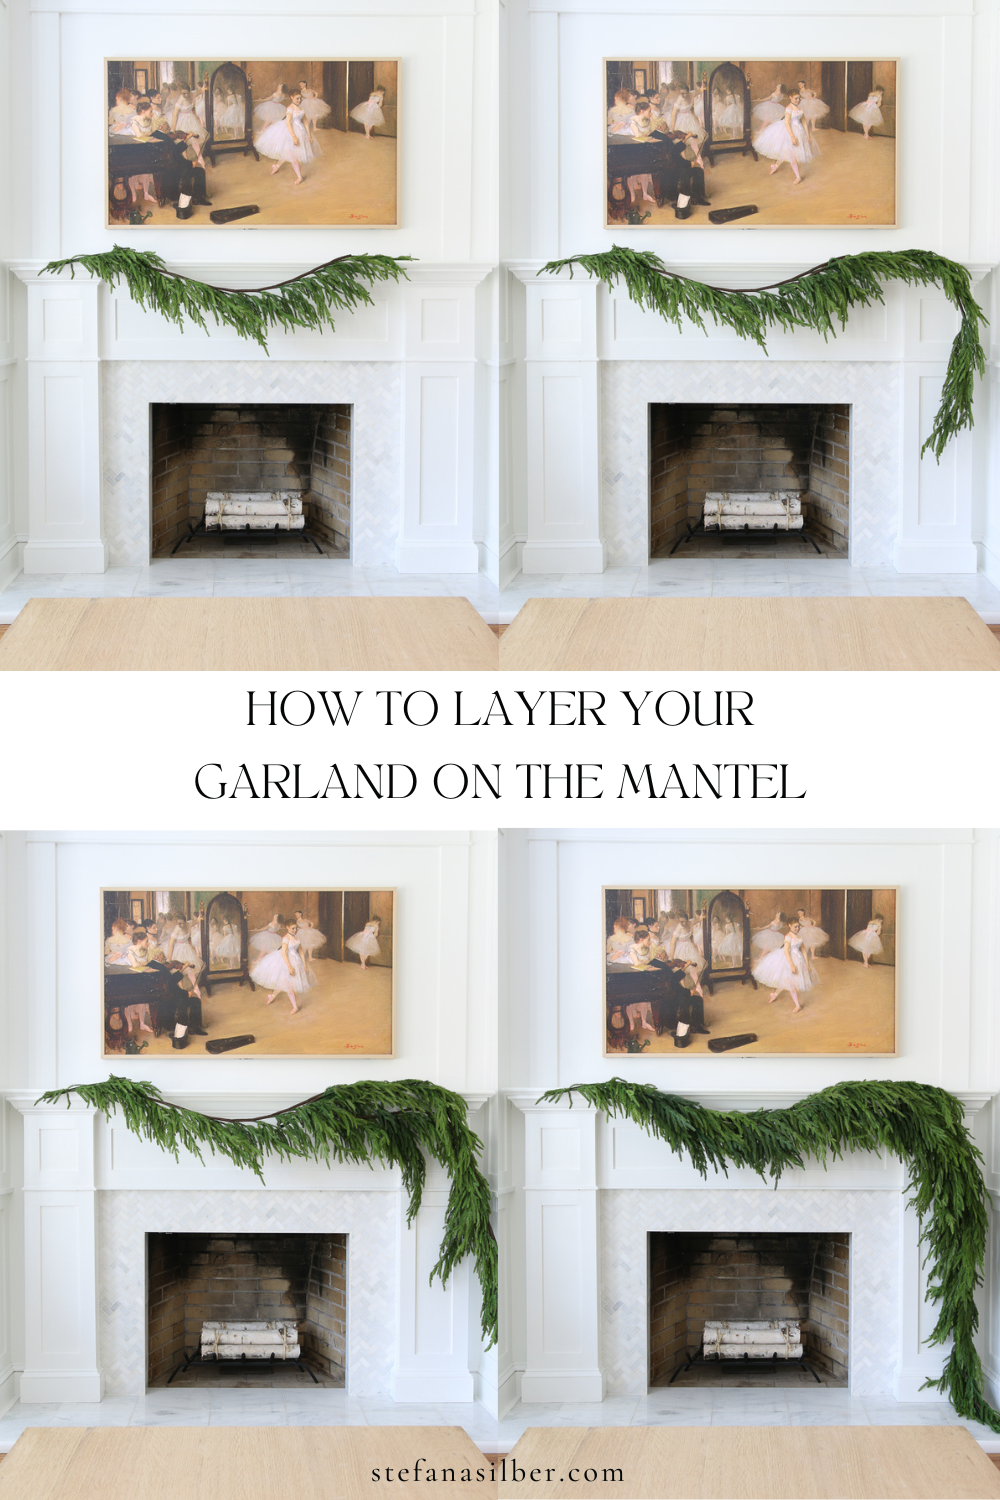 How to Hang Garland on the Mantel